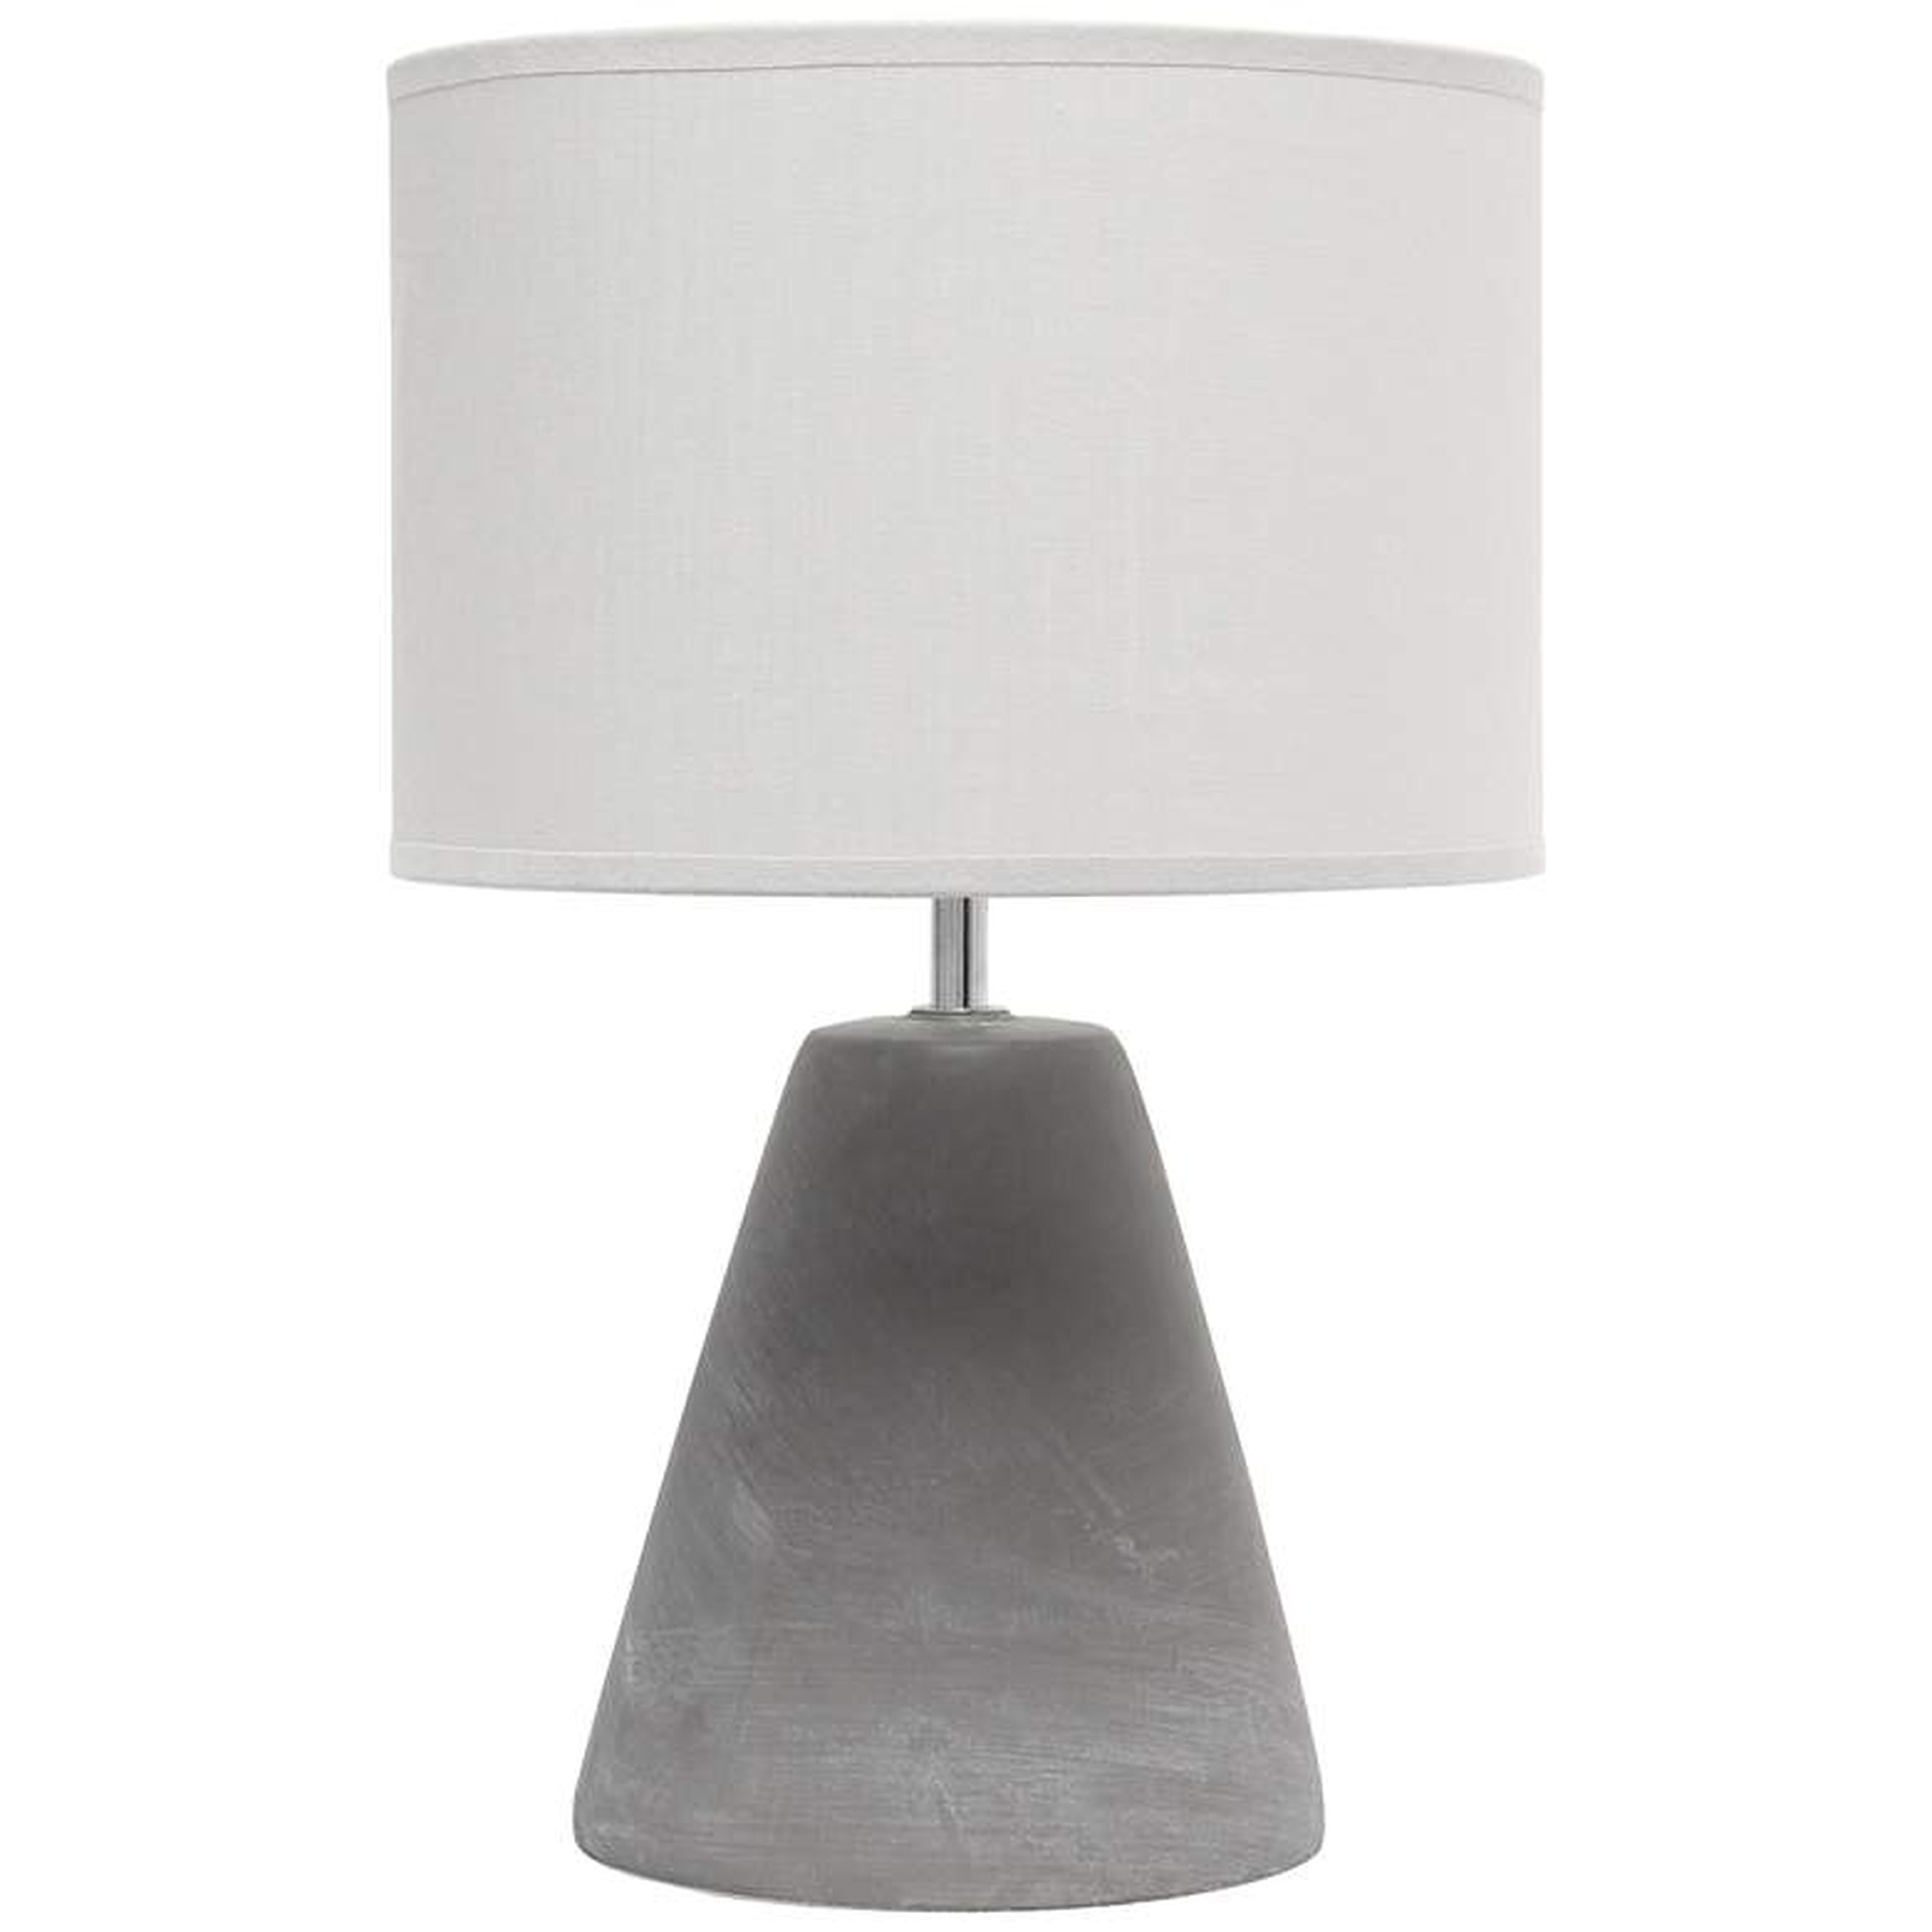 Simple Designs Pinnacle Gray Accent Table Lamp, 14.25" - Lamps Plus